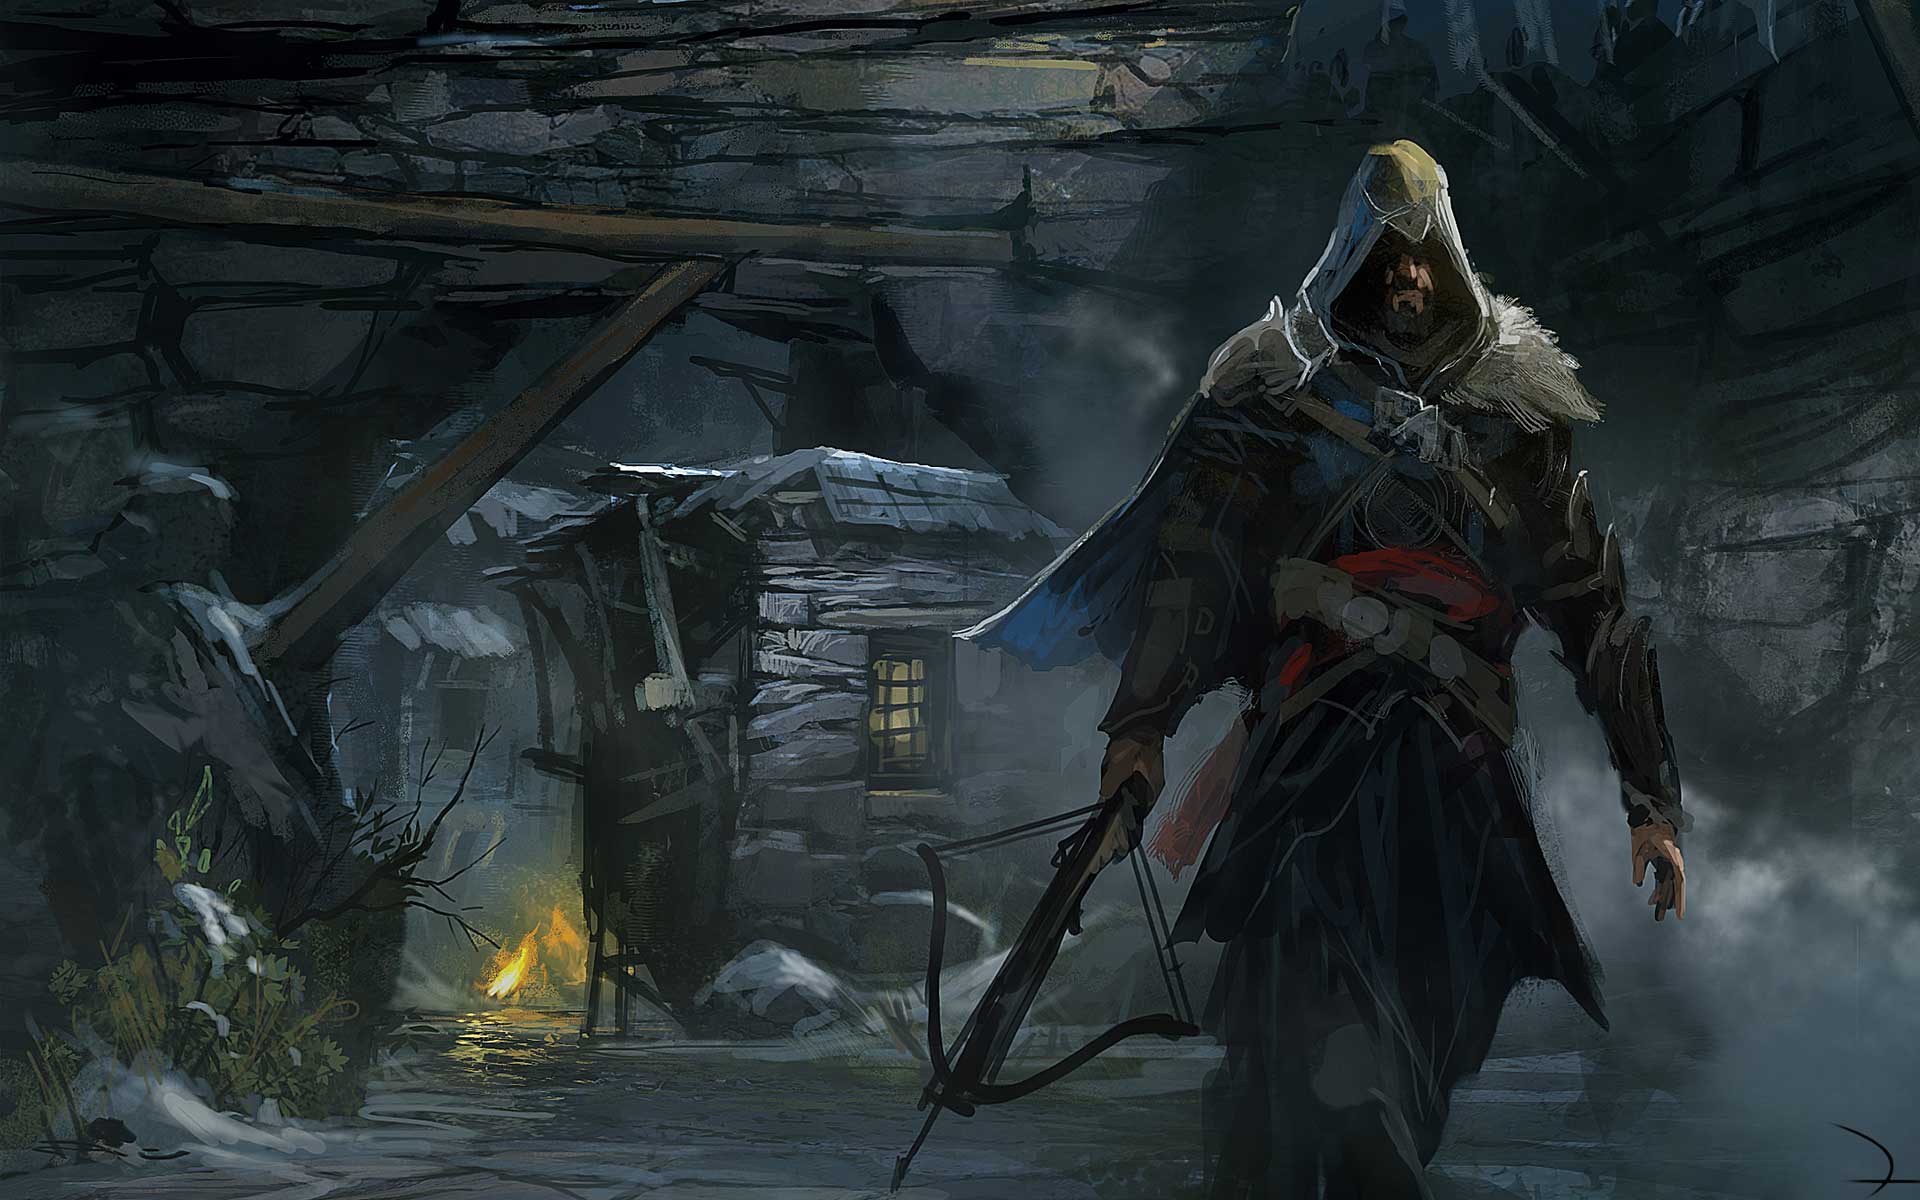 Assassin's Creed: Revelations, Assassin's Creed Wiki